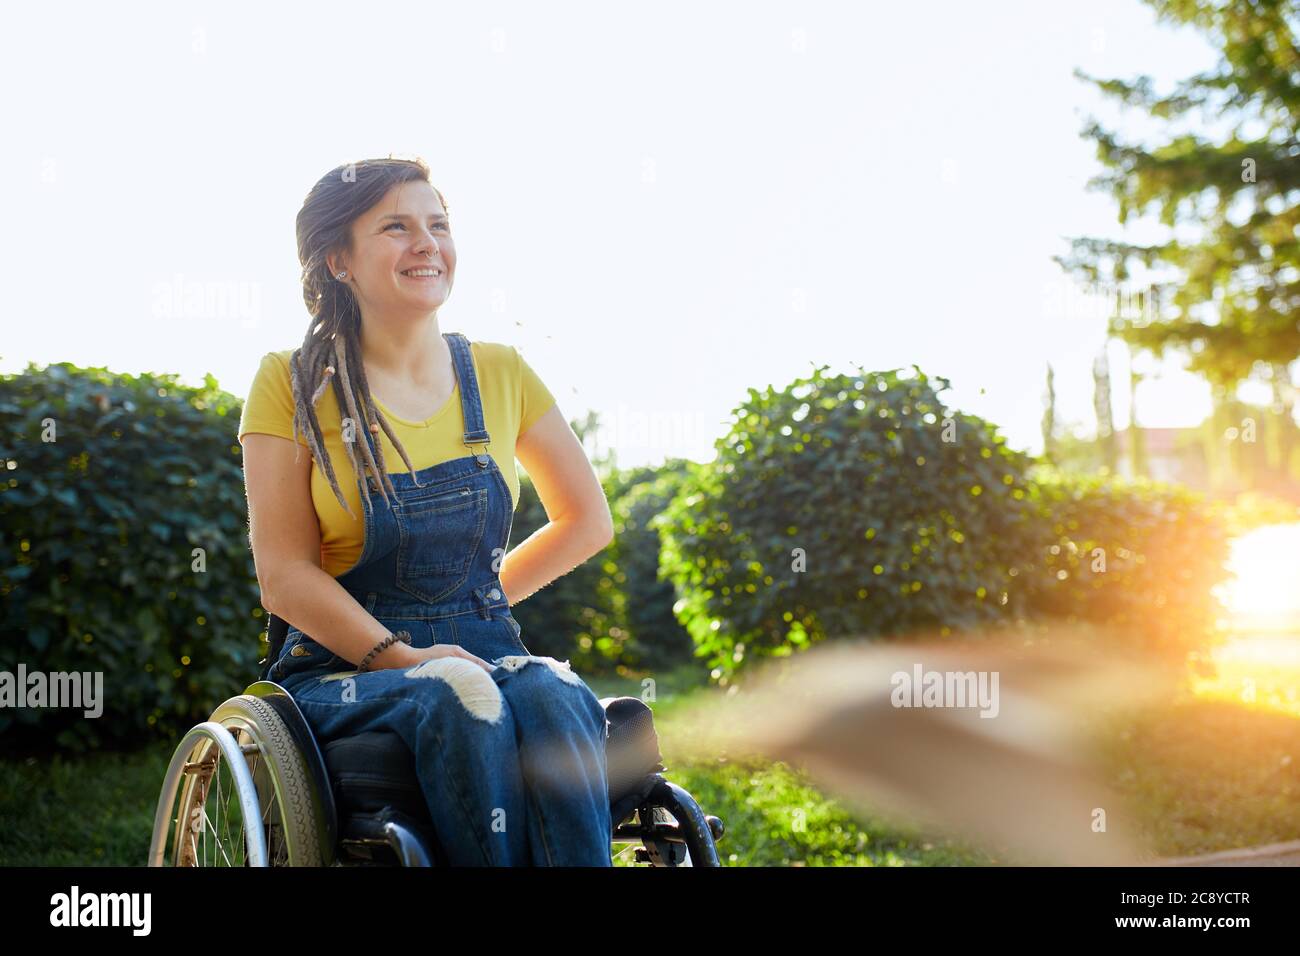 beautiful disabled girl looking up, looking at the bright side of life, woman gets pleasure from the beauty of nature, landscape. copy space Stock Photo